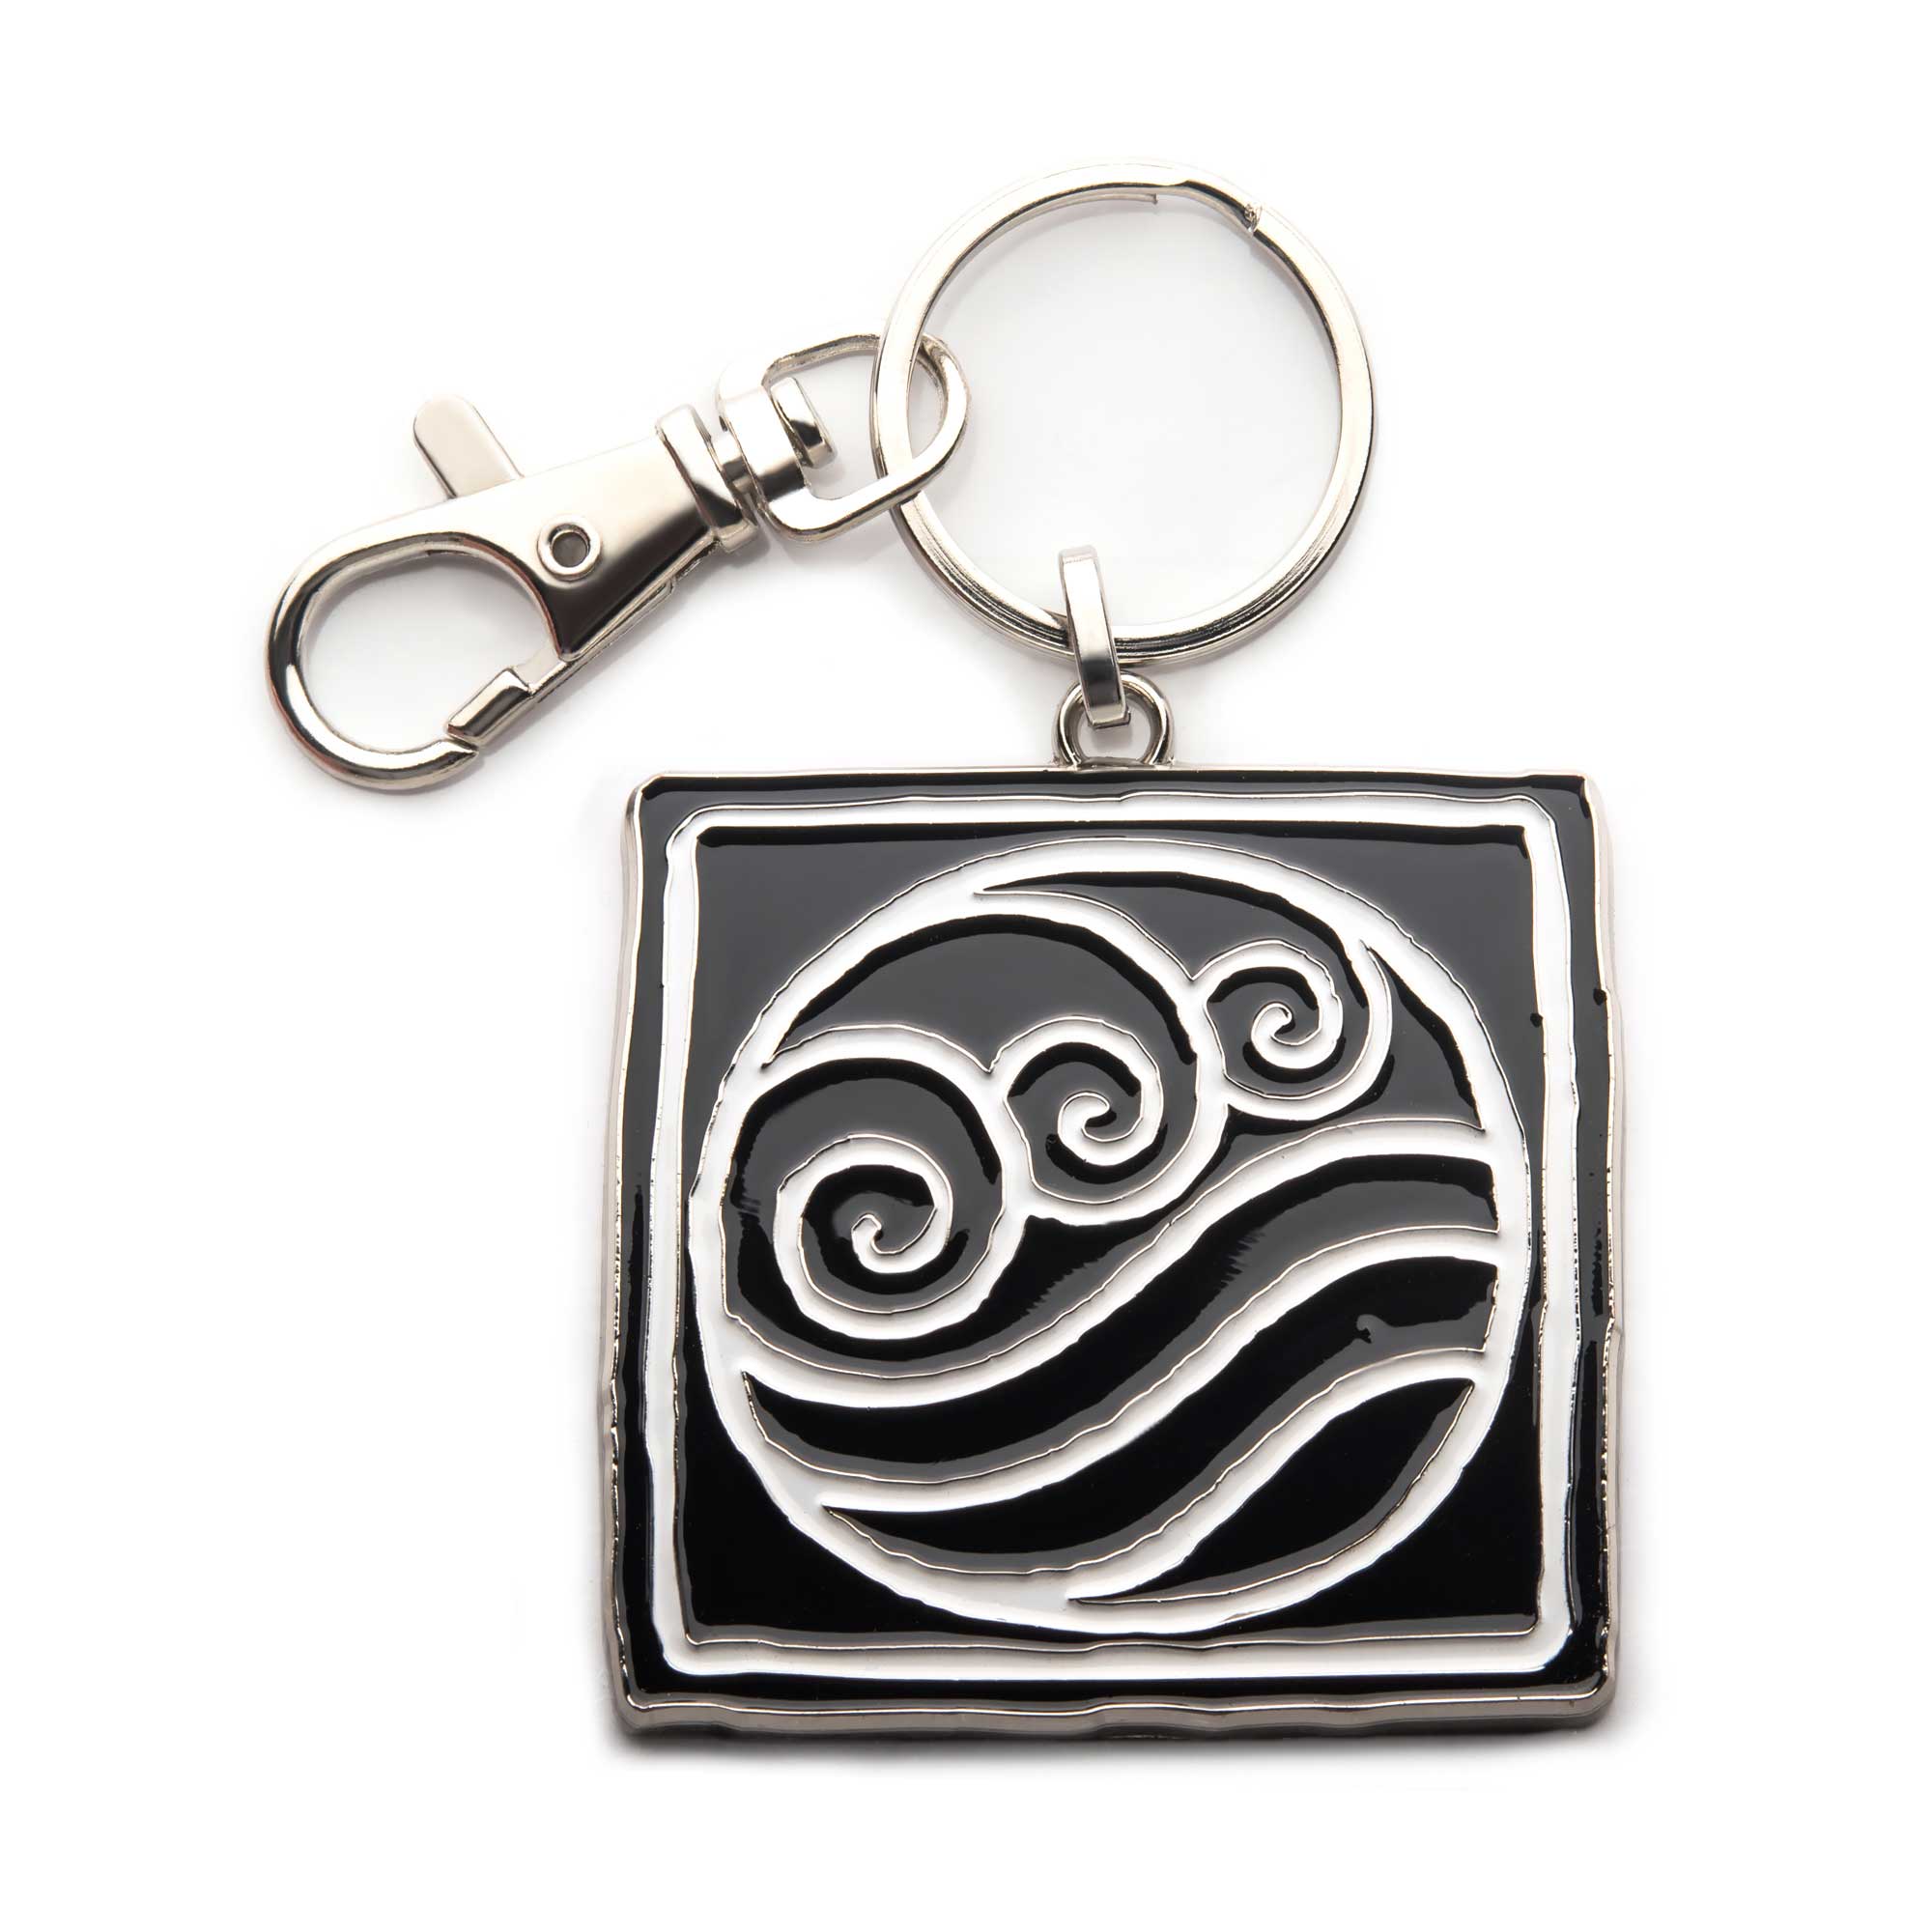 Nickelodeon Avatar: The Last Airbender The Water Tribe Symbol Keychain